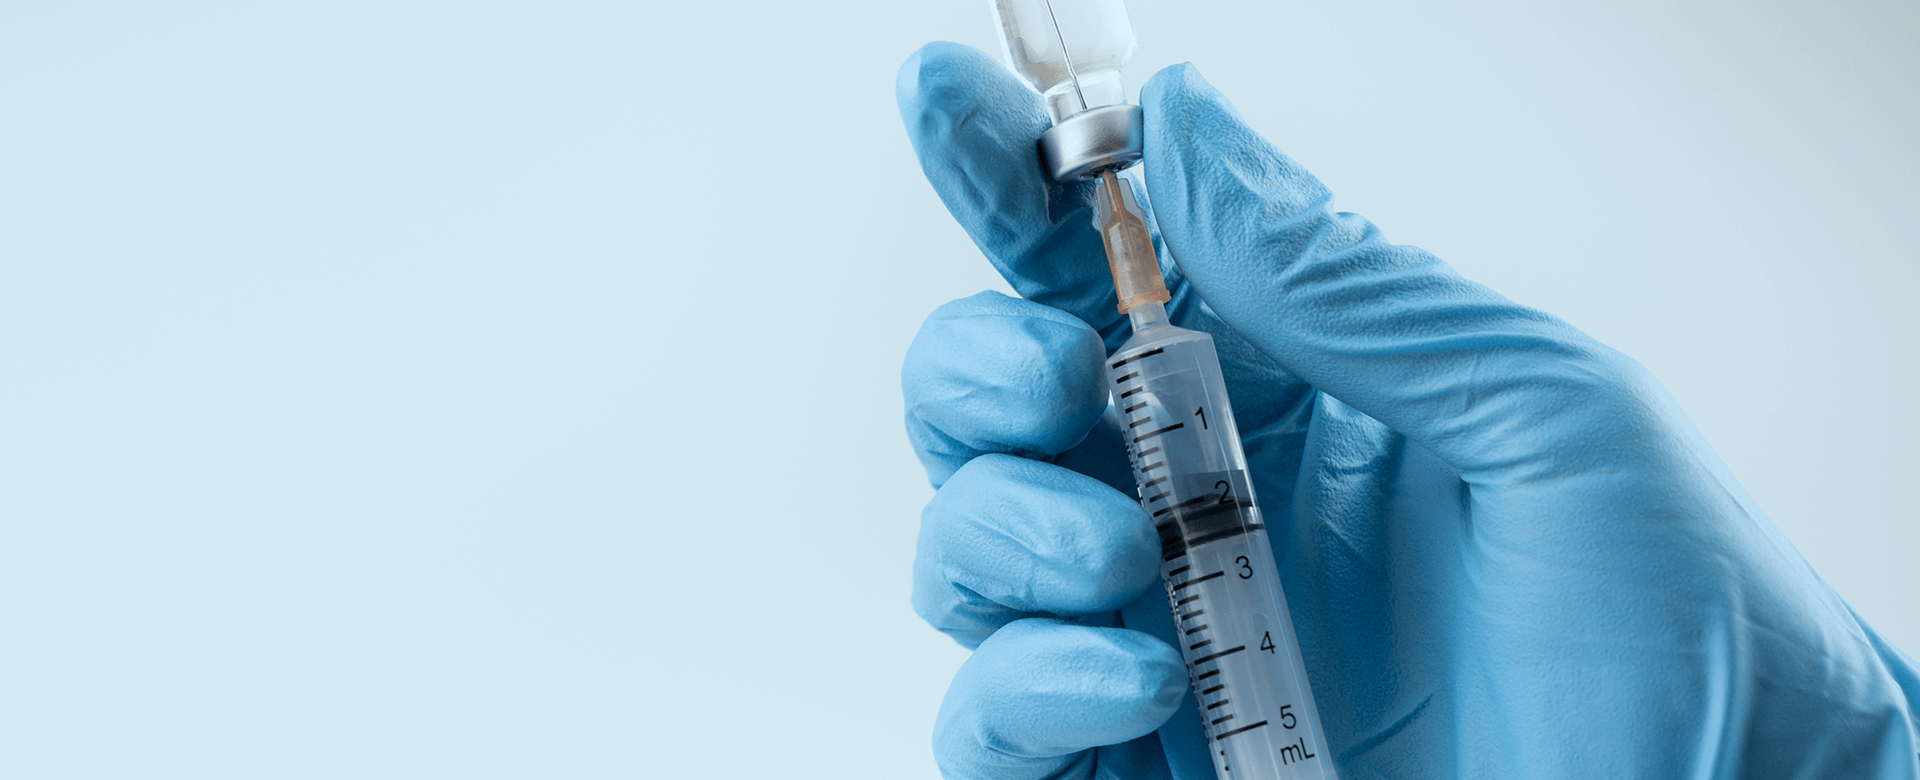 Preparing HGH Injection with Syringe - Medical Care